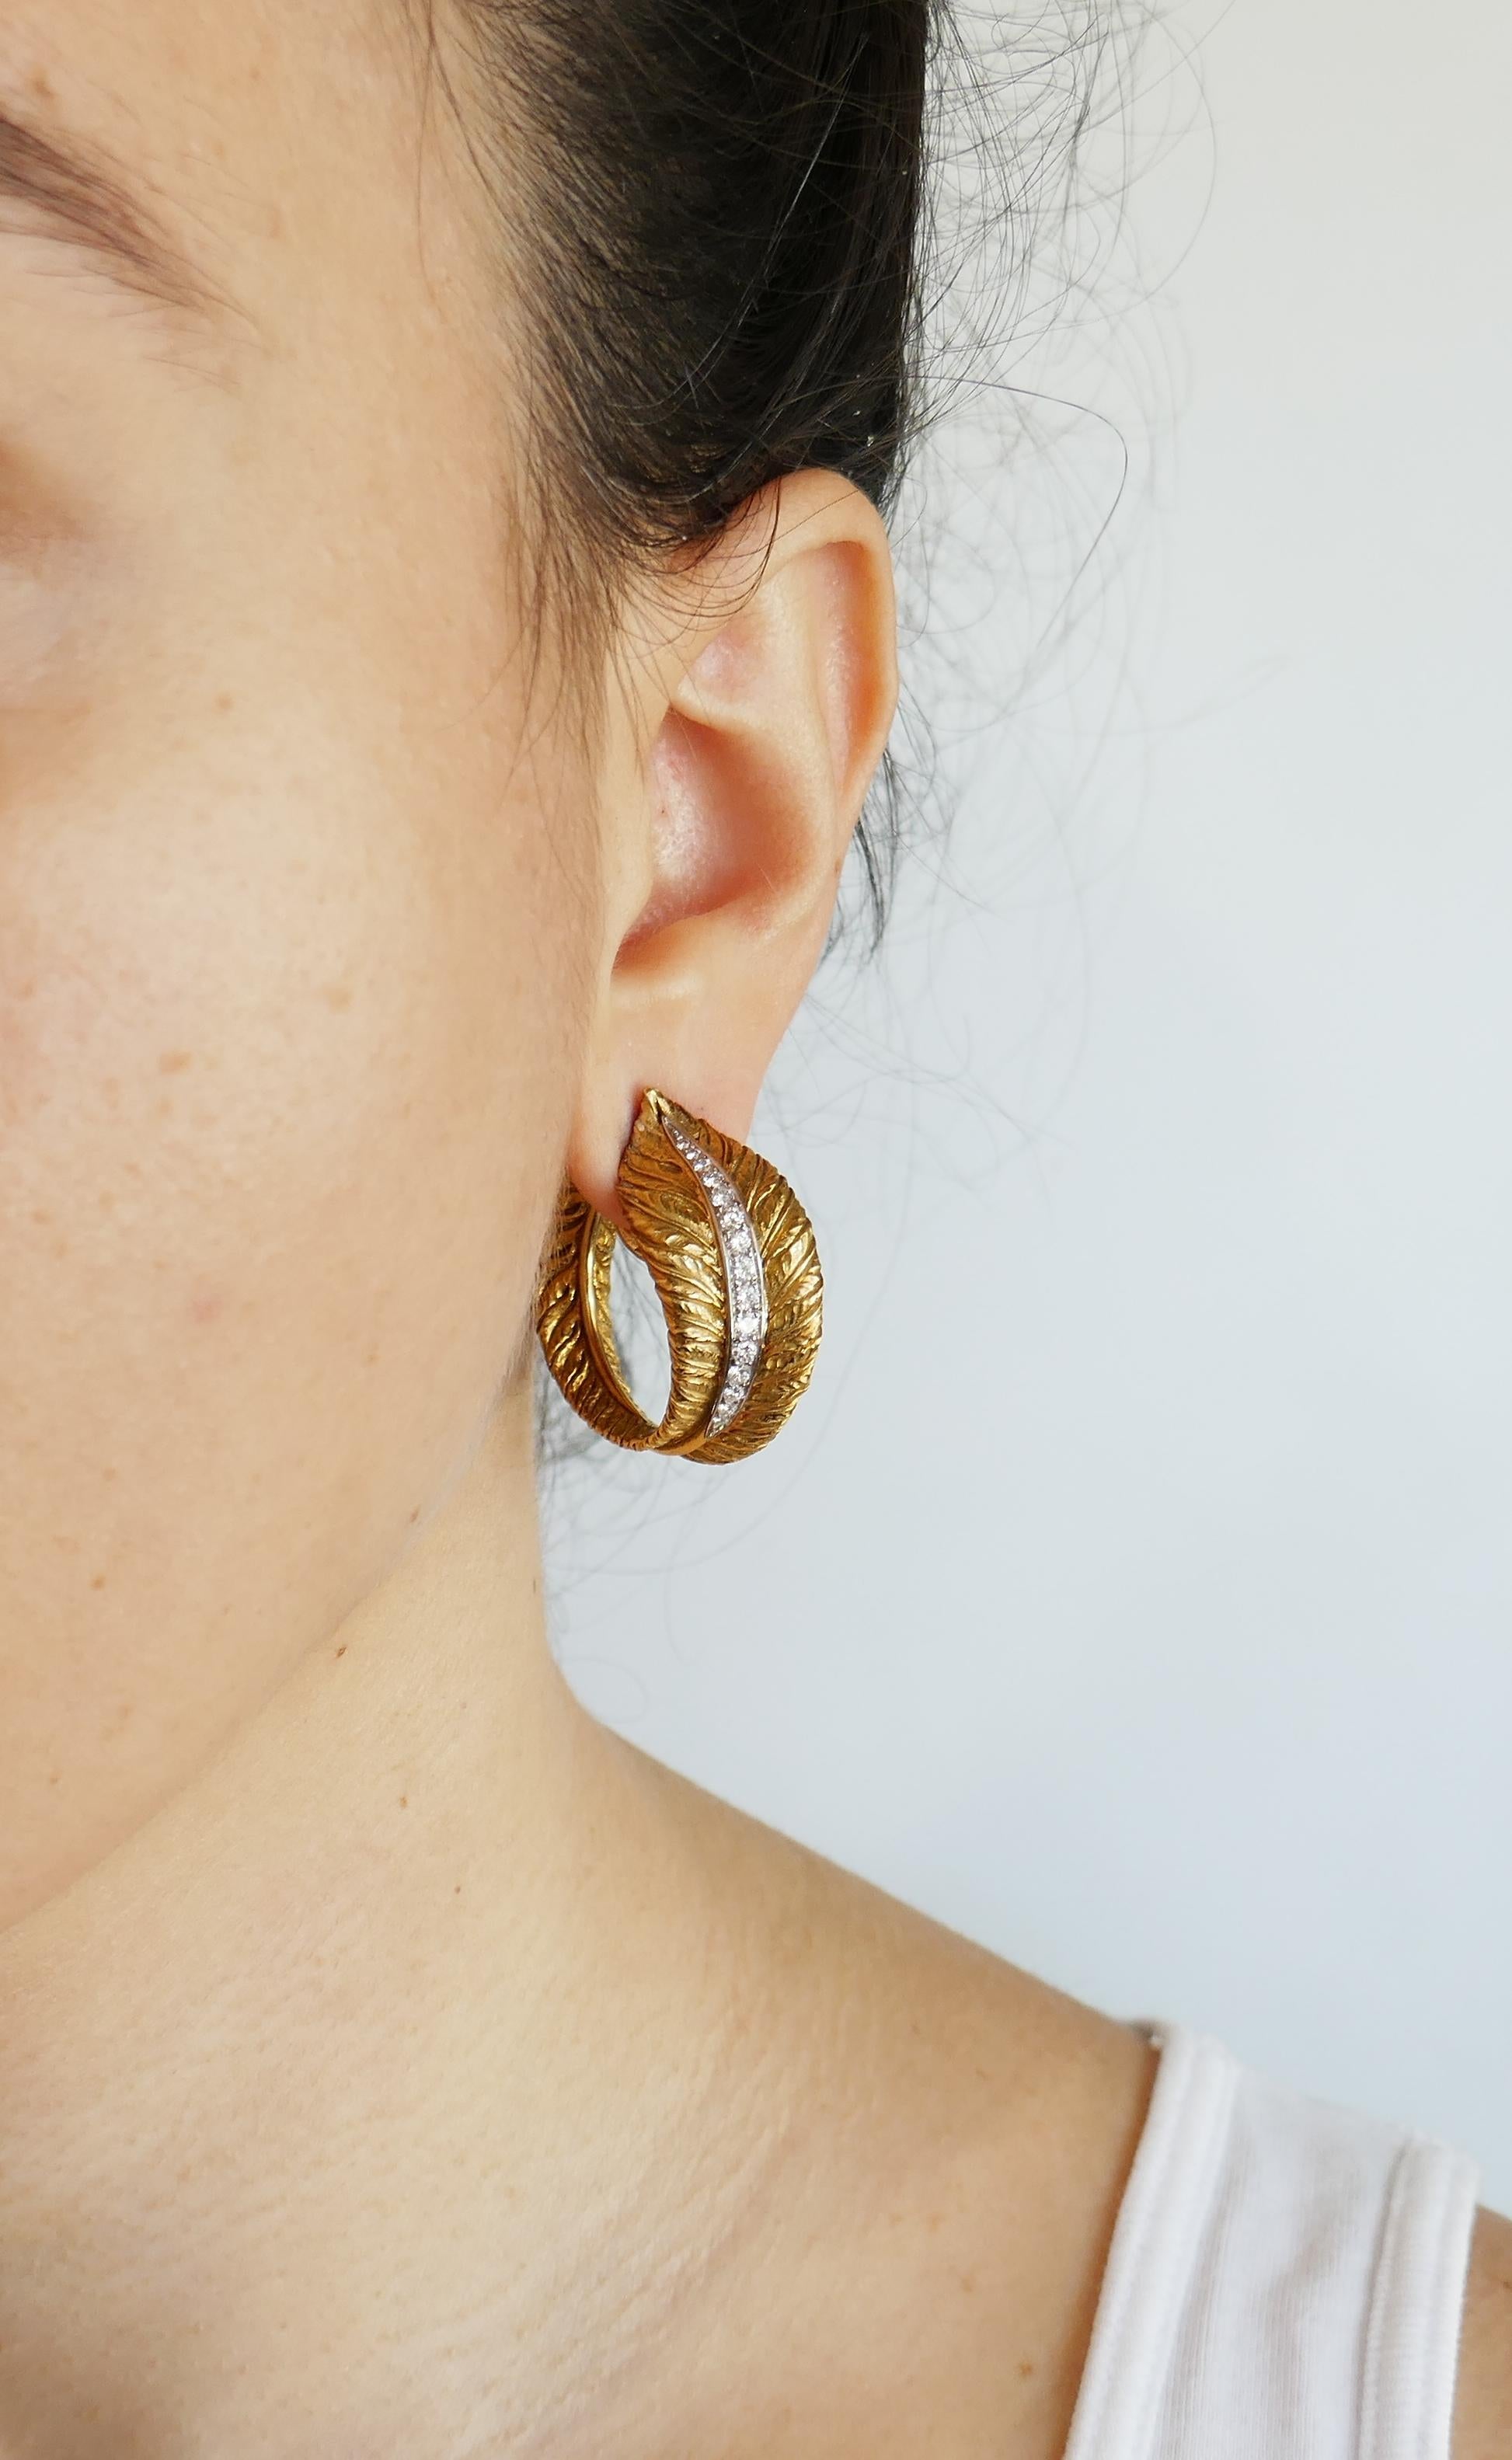 A pair of textured architectural hoop earrings. Elegant, timeless and wearable,  they are a great addition to your jewelry collection. 
The earrings are made of 18 karat (tested) yellow gold and set with round brilliant cut diamonds. Diamonds are